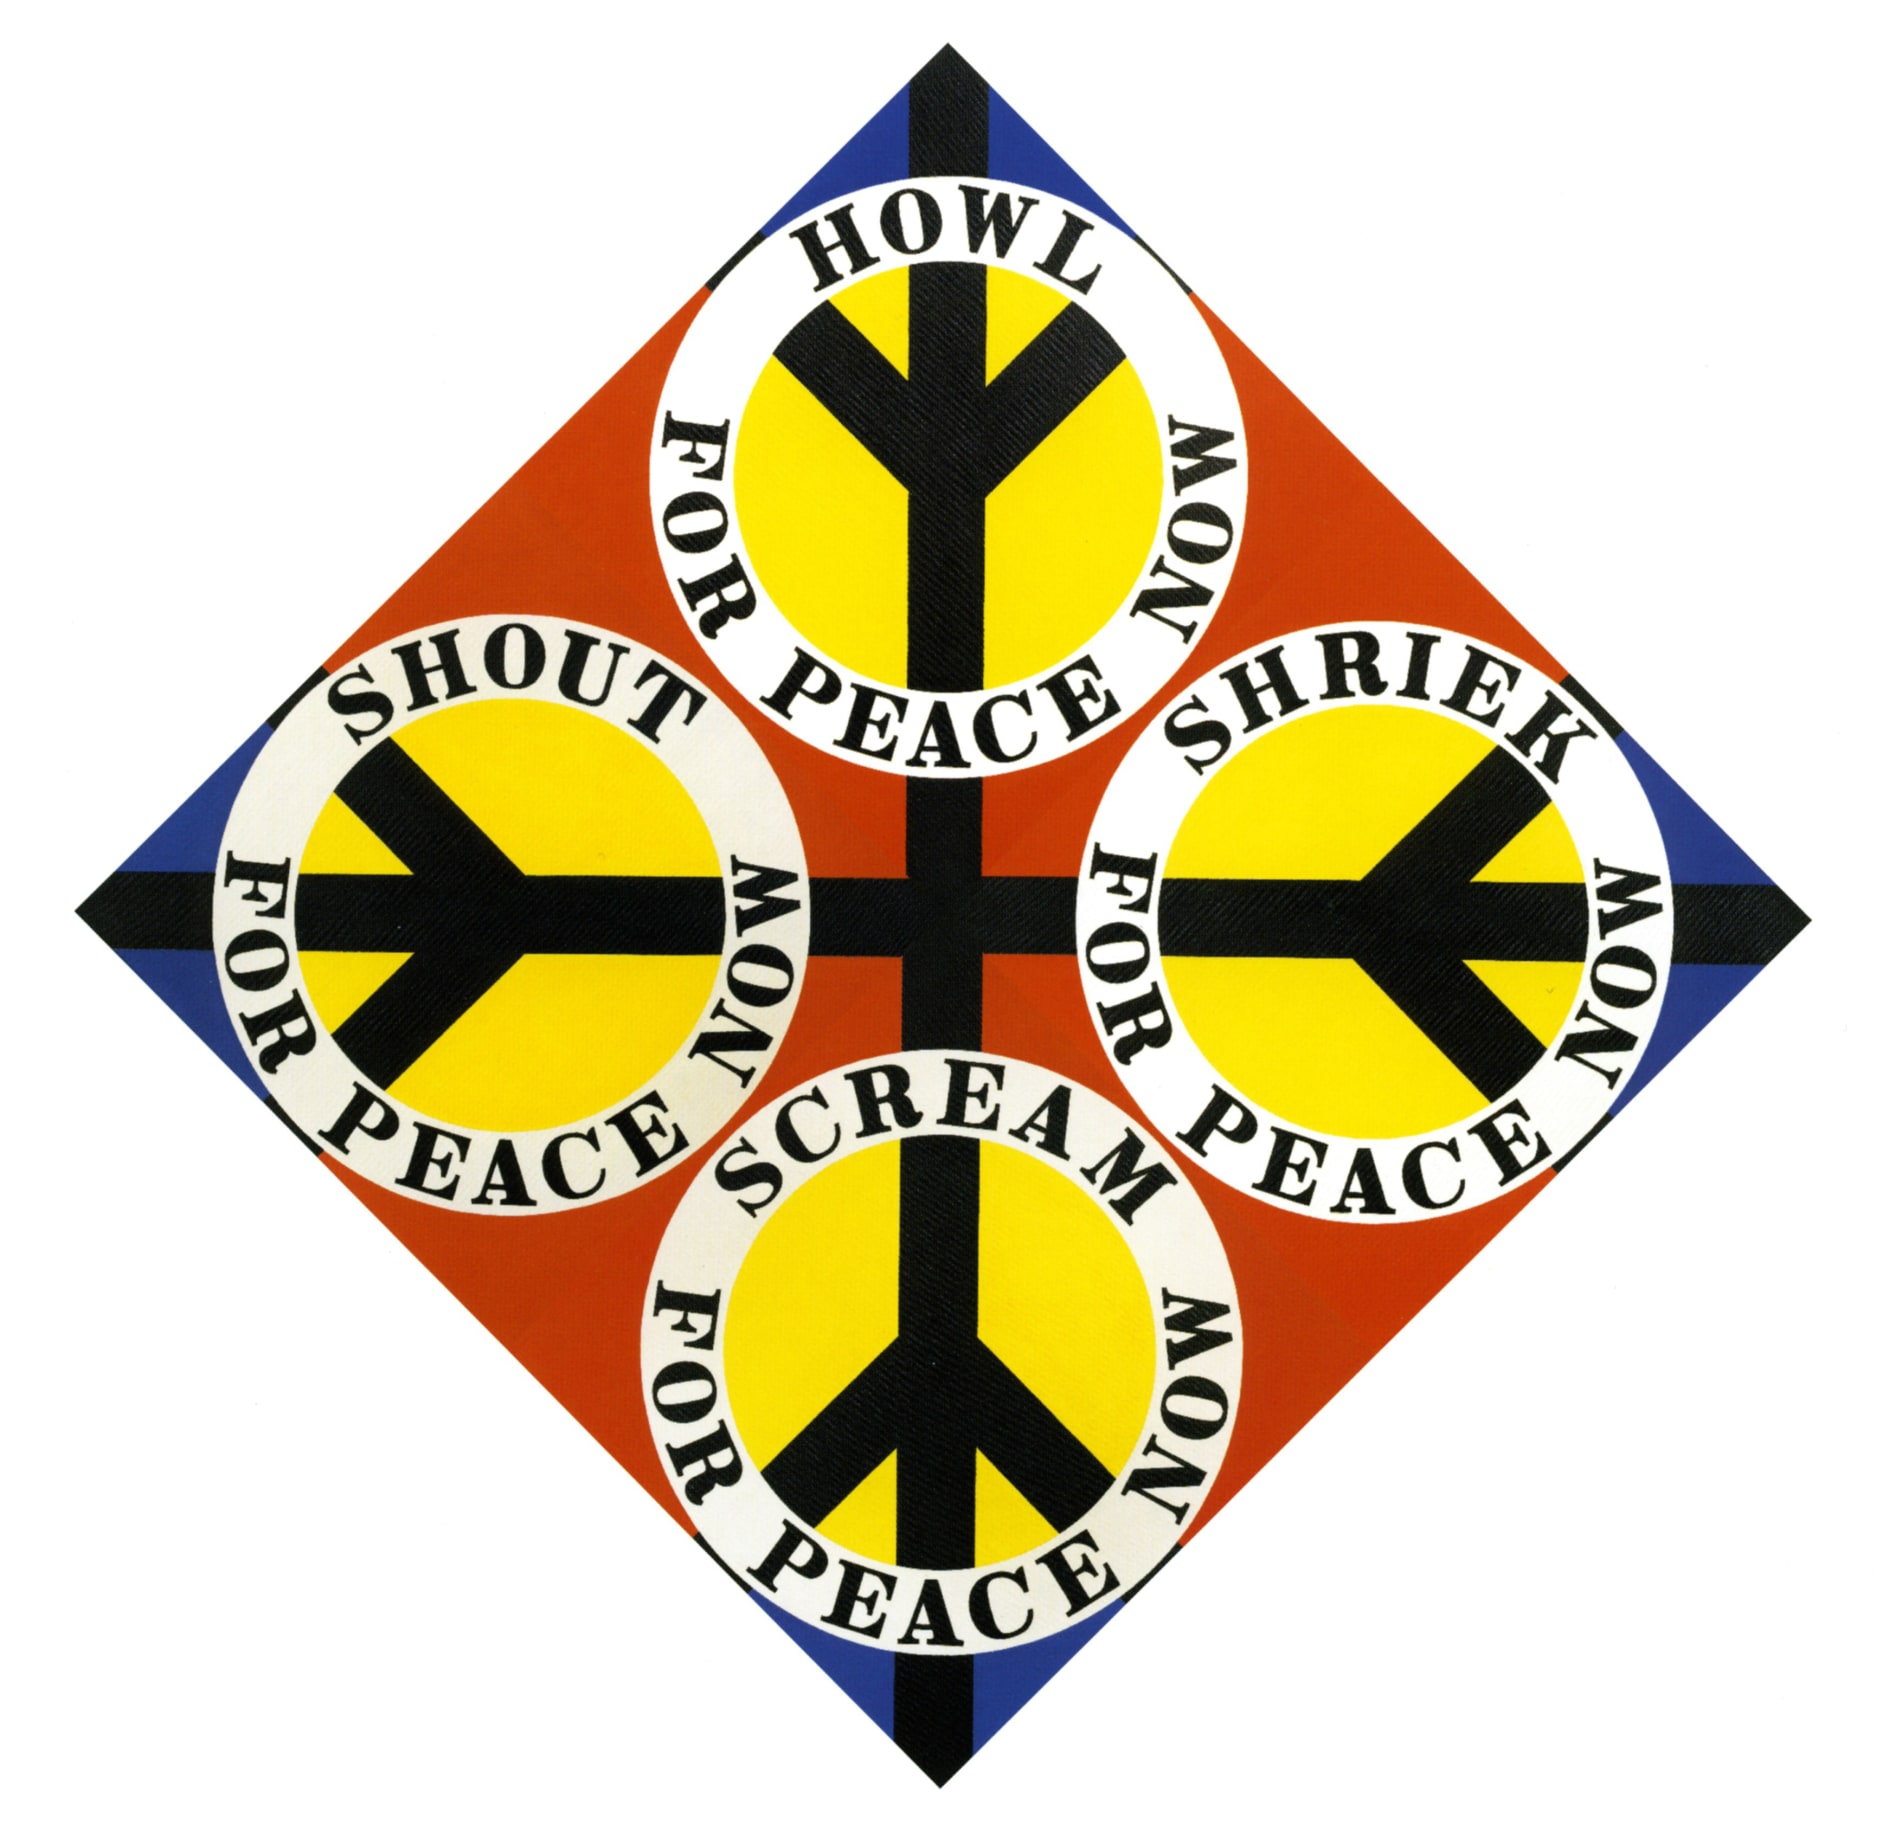 Four Diamond Peace, a diamond shaped painting comprised of four panels, measuring 68 by 68 inches overall. The panels have a primarily red ground, although the corner of each panel facing outward is blue. Each panel is dominated by a yellow circle with a black peace sign pointing towards the center of the work. Surrounding each circle is a white ring with black text. The text in each ring reads, clockwise from top: &quot;How for Peace Now,&quot; &quot;Shriek for Peace Now,&quot; &quot;Scream for Peace Now,&quot; and &quot;Shout for Peace Now.&quot;